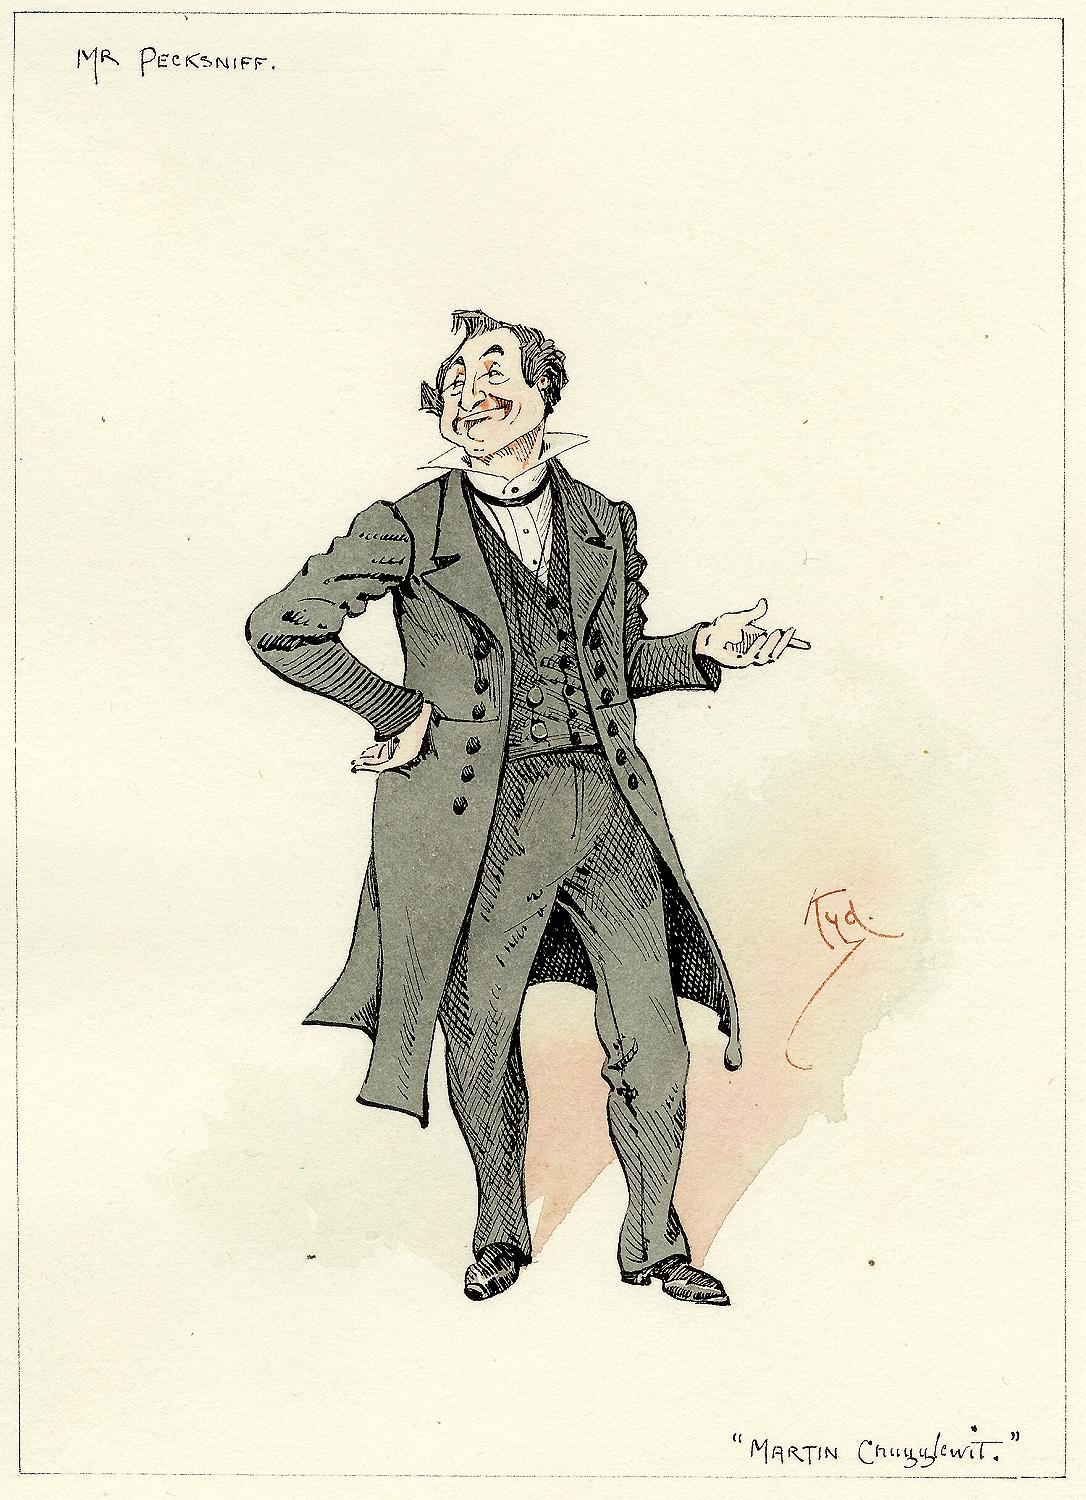 British (KYD) - DICKENS - Mr. Pecksniff (from Martin Chuzzlewit) - ORIGINAL SKETCH For Sale